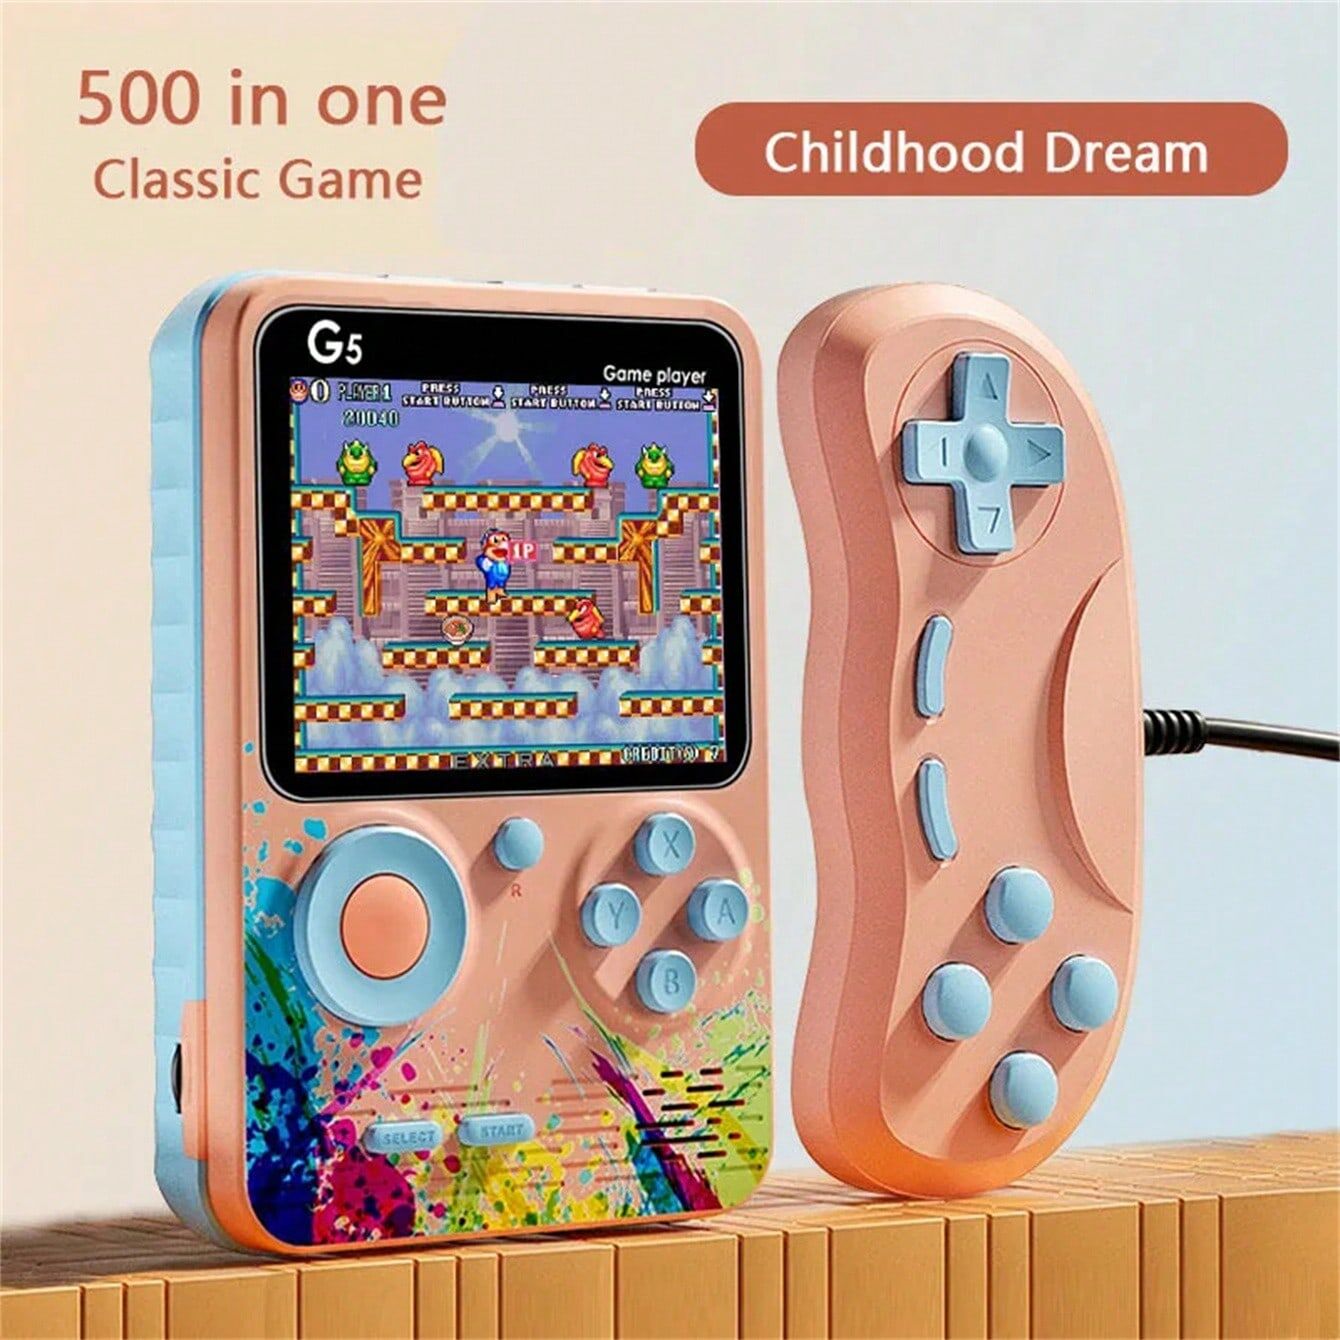 SHEIN G5 Handheld Game Console 500 In 1 Nostalgic Retro Color Screen Game Console Handheld Colorful Color Matching Game Green Single,doubles